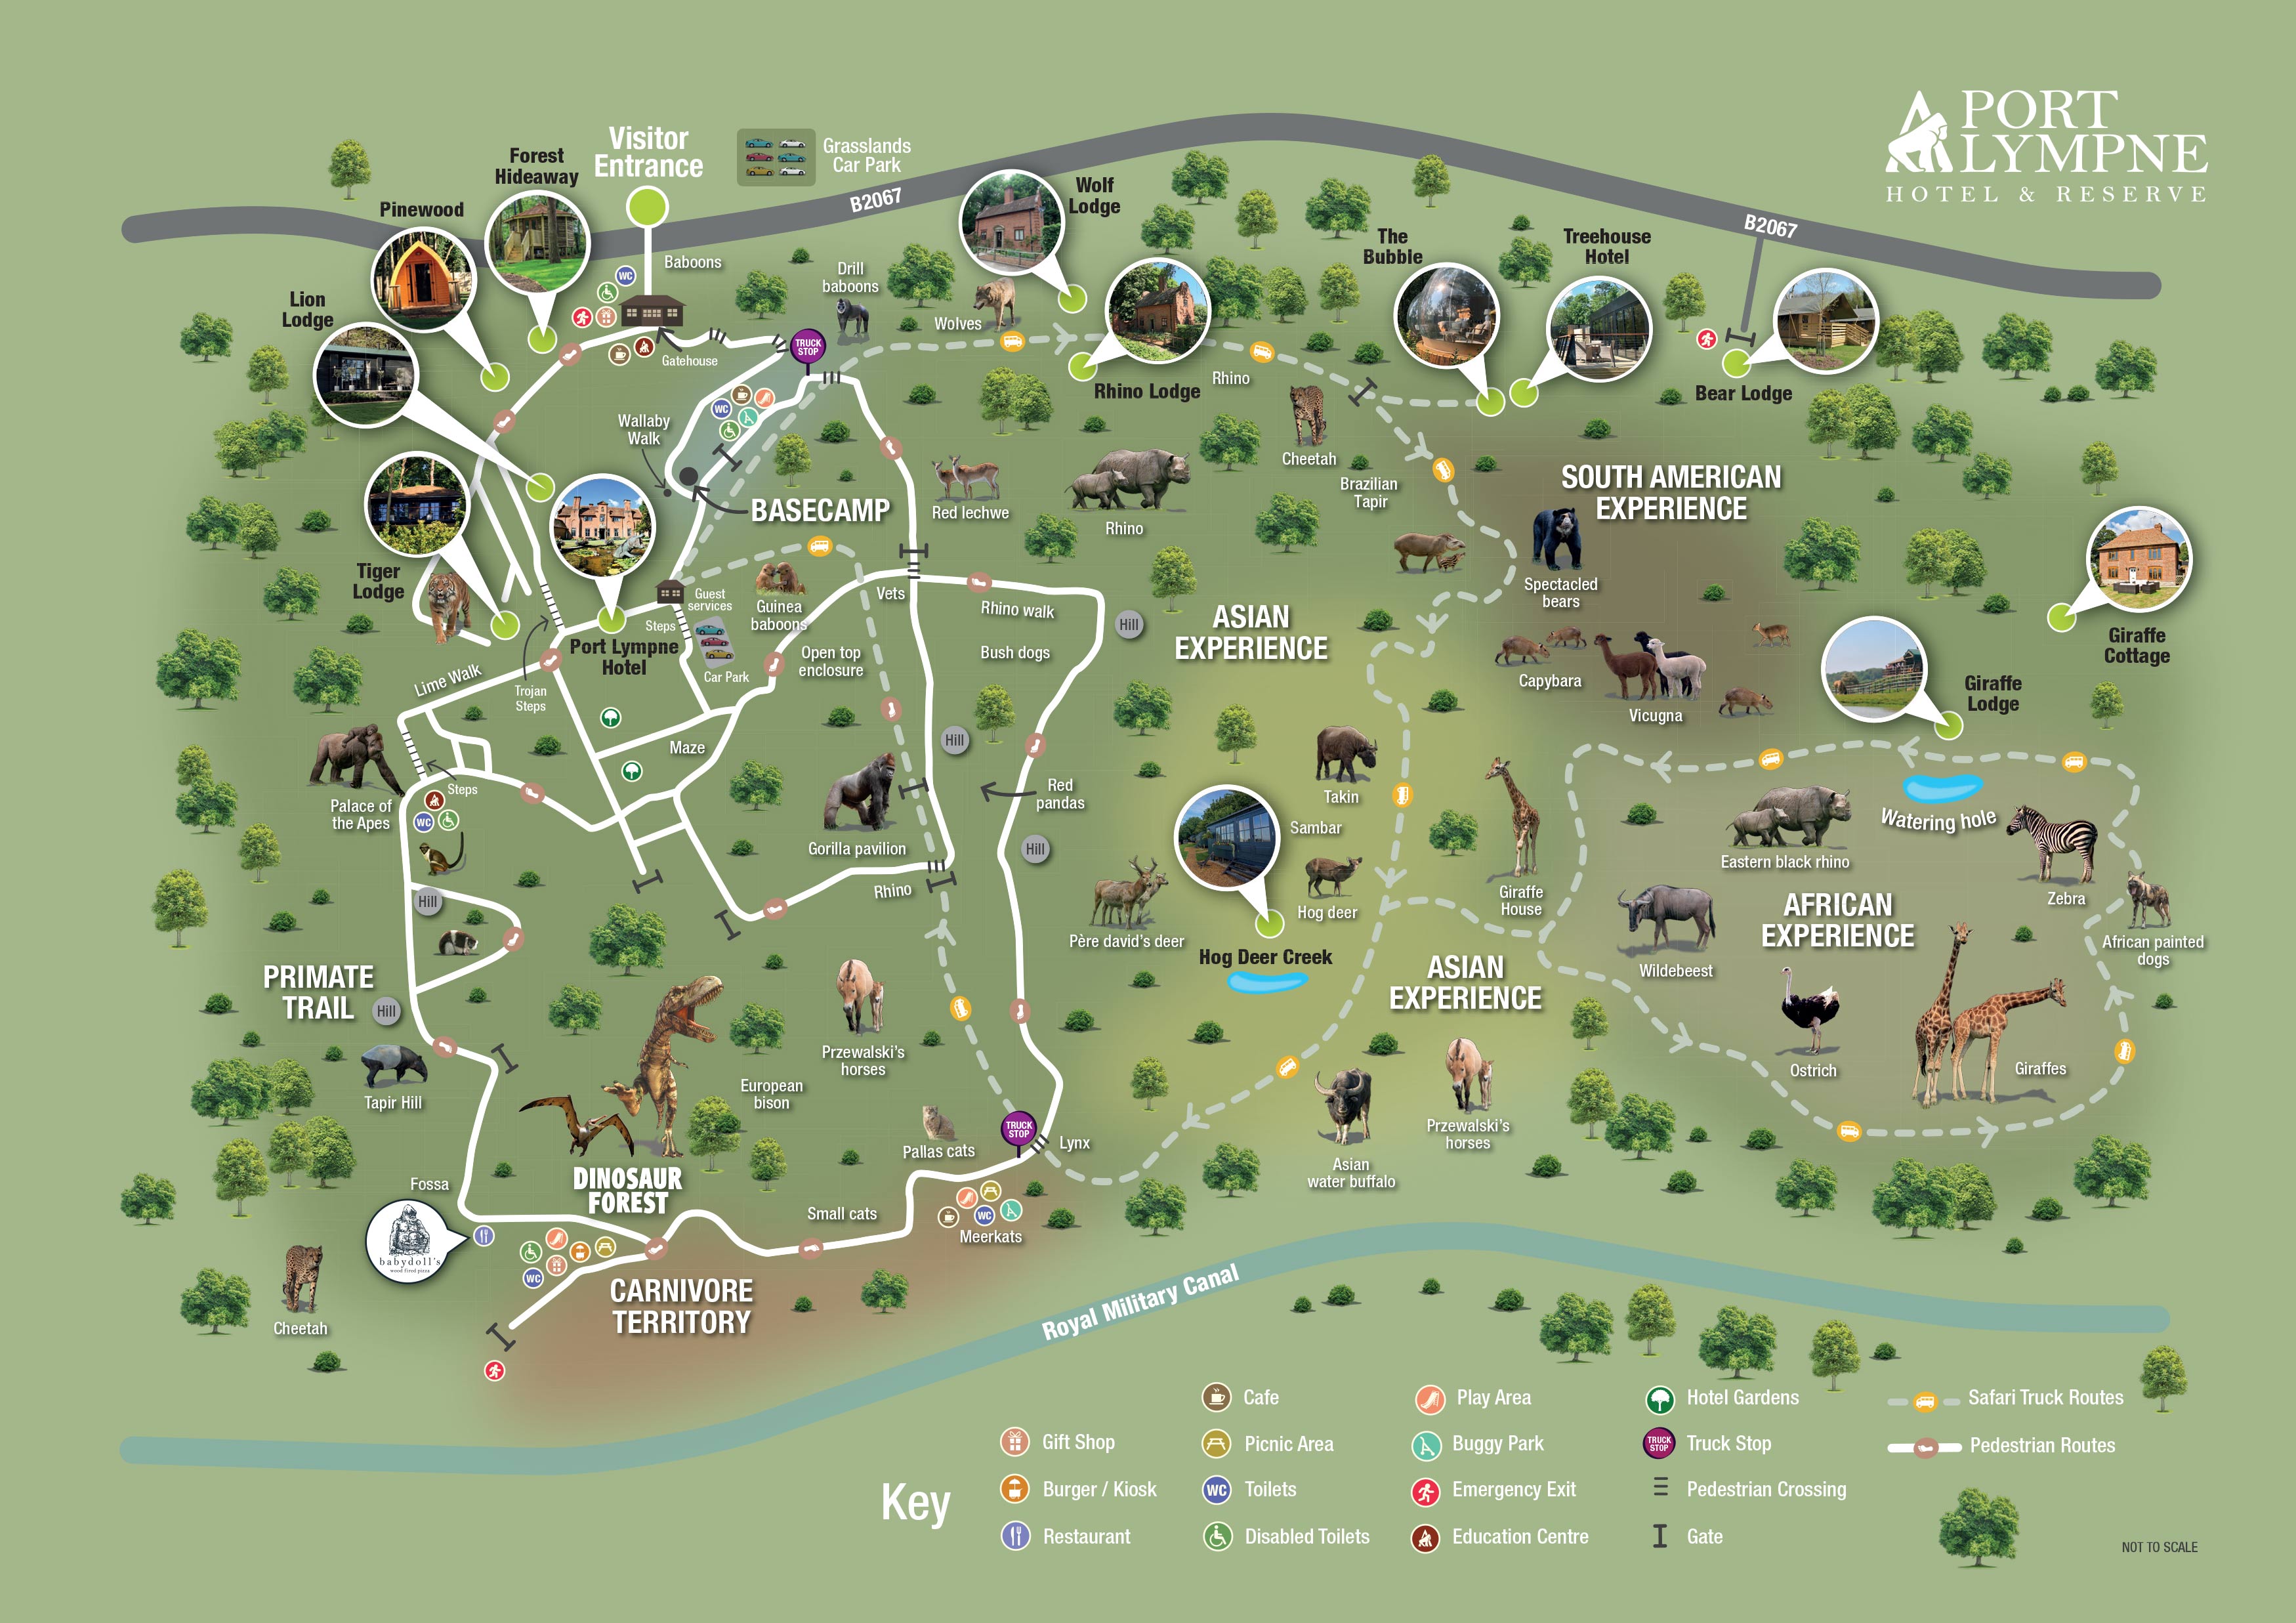 Accessibility - Port Lympne Hotel & Reserve | The Aspinall Foundation